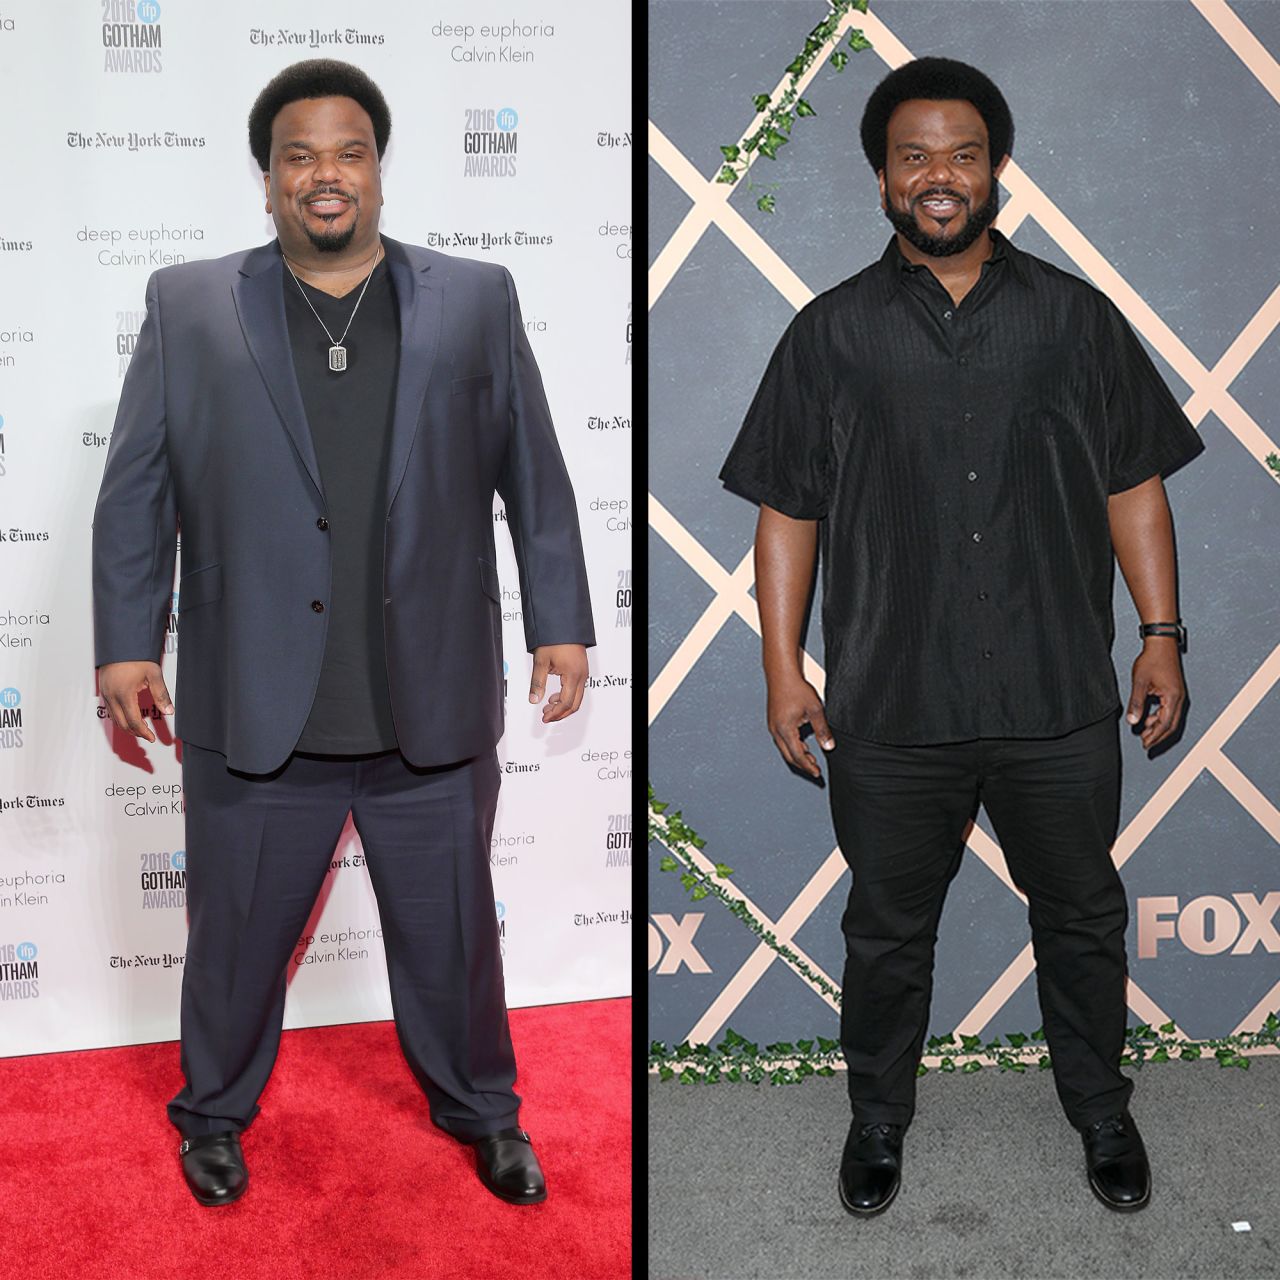 Actor Craig Robinson said in October 2017 that he lost 50 lbs. by giving up alcohol, working out and going vegan. 